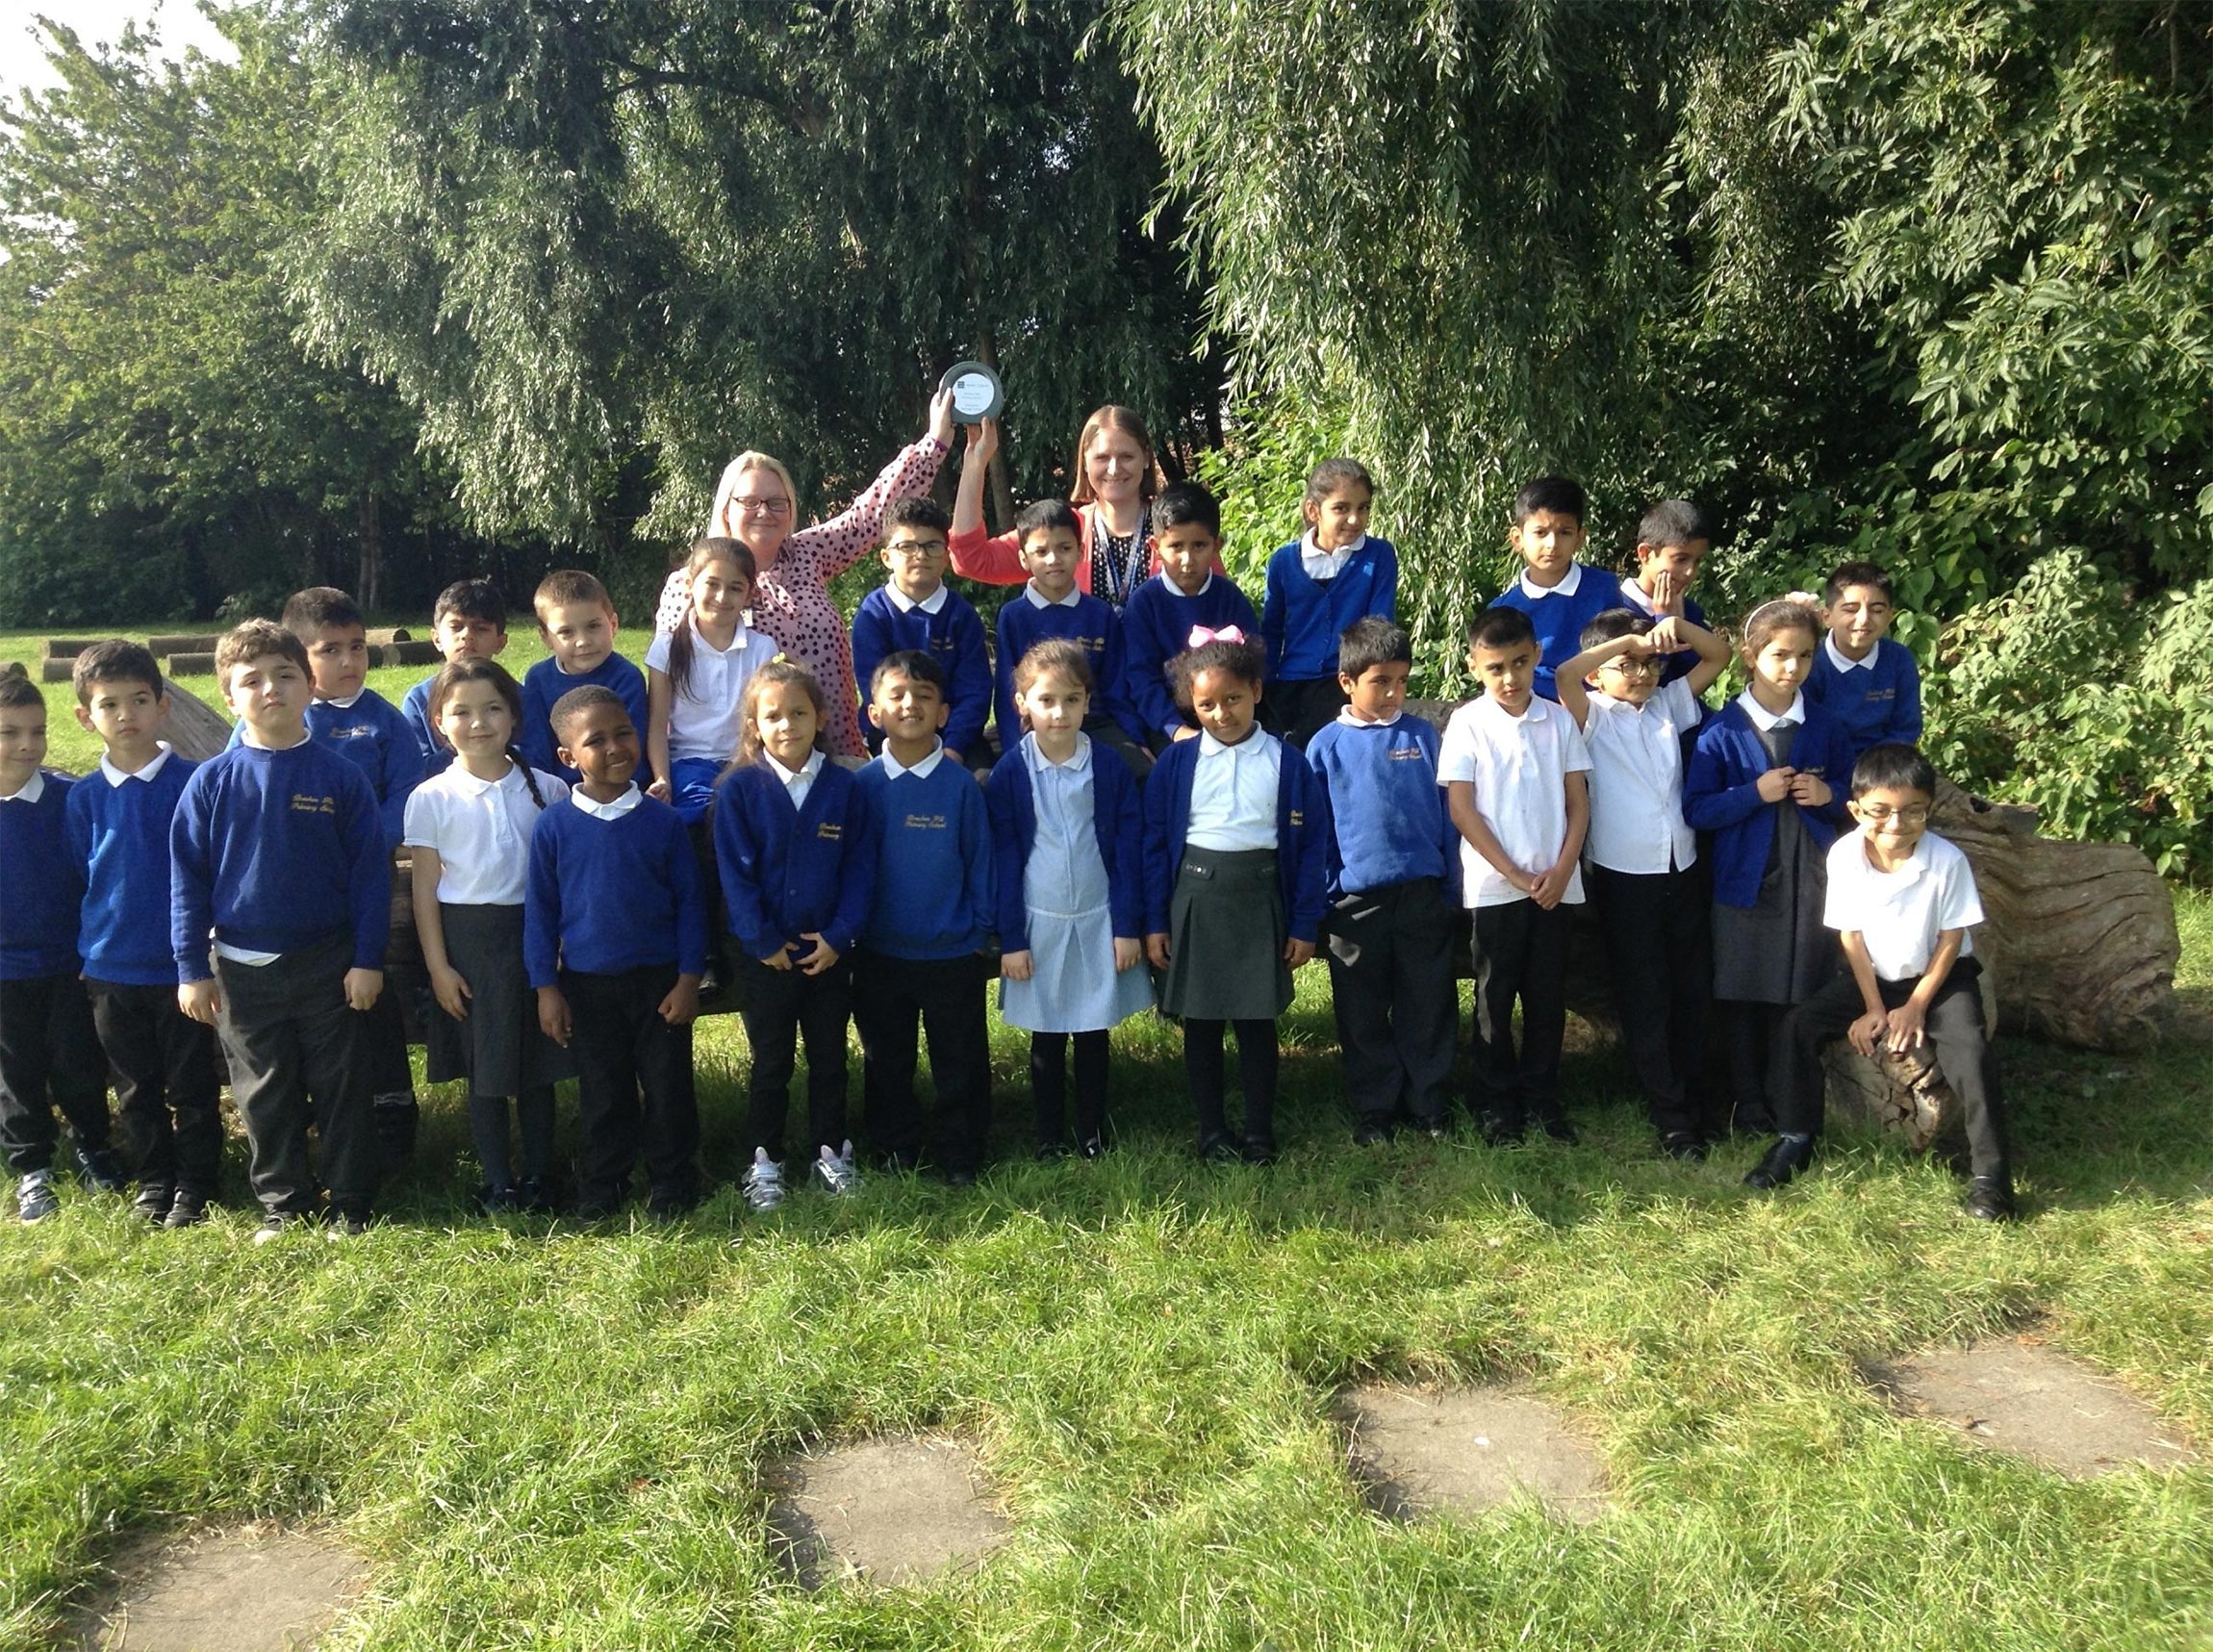 Teachers and pupils from Breckon Hill Primary School in Middlesbrough with their Champion Heritage School Award